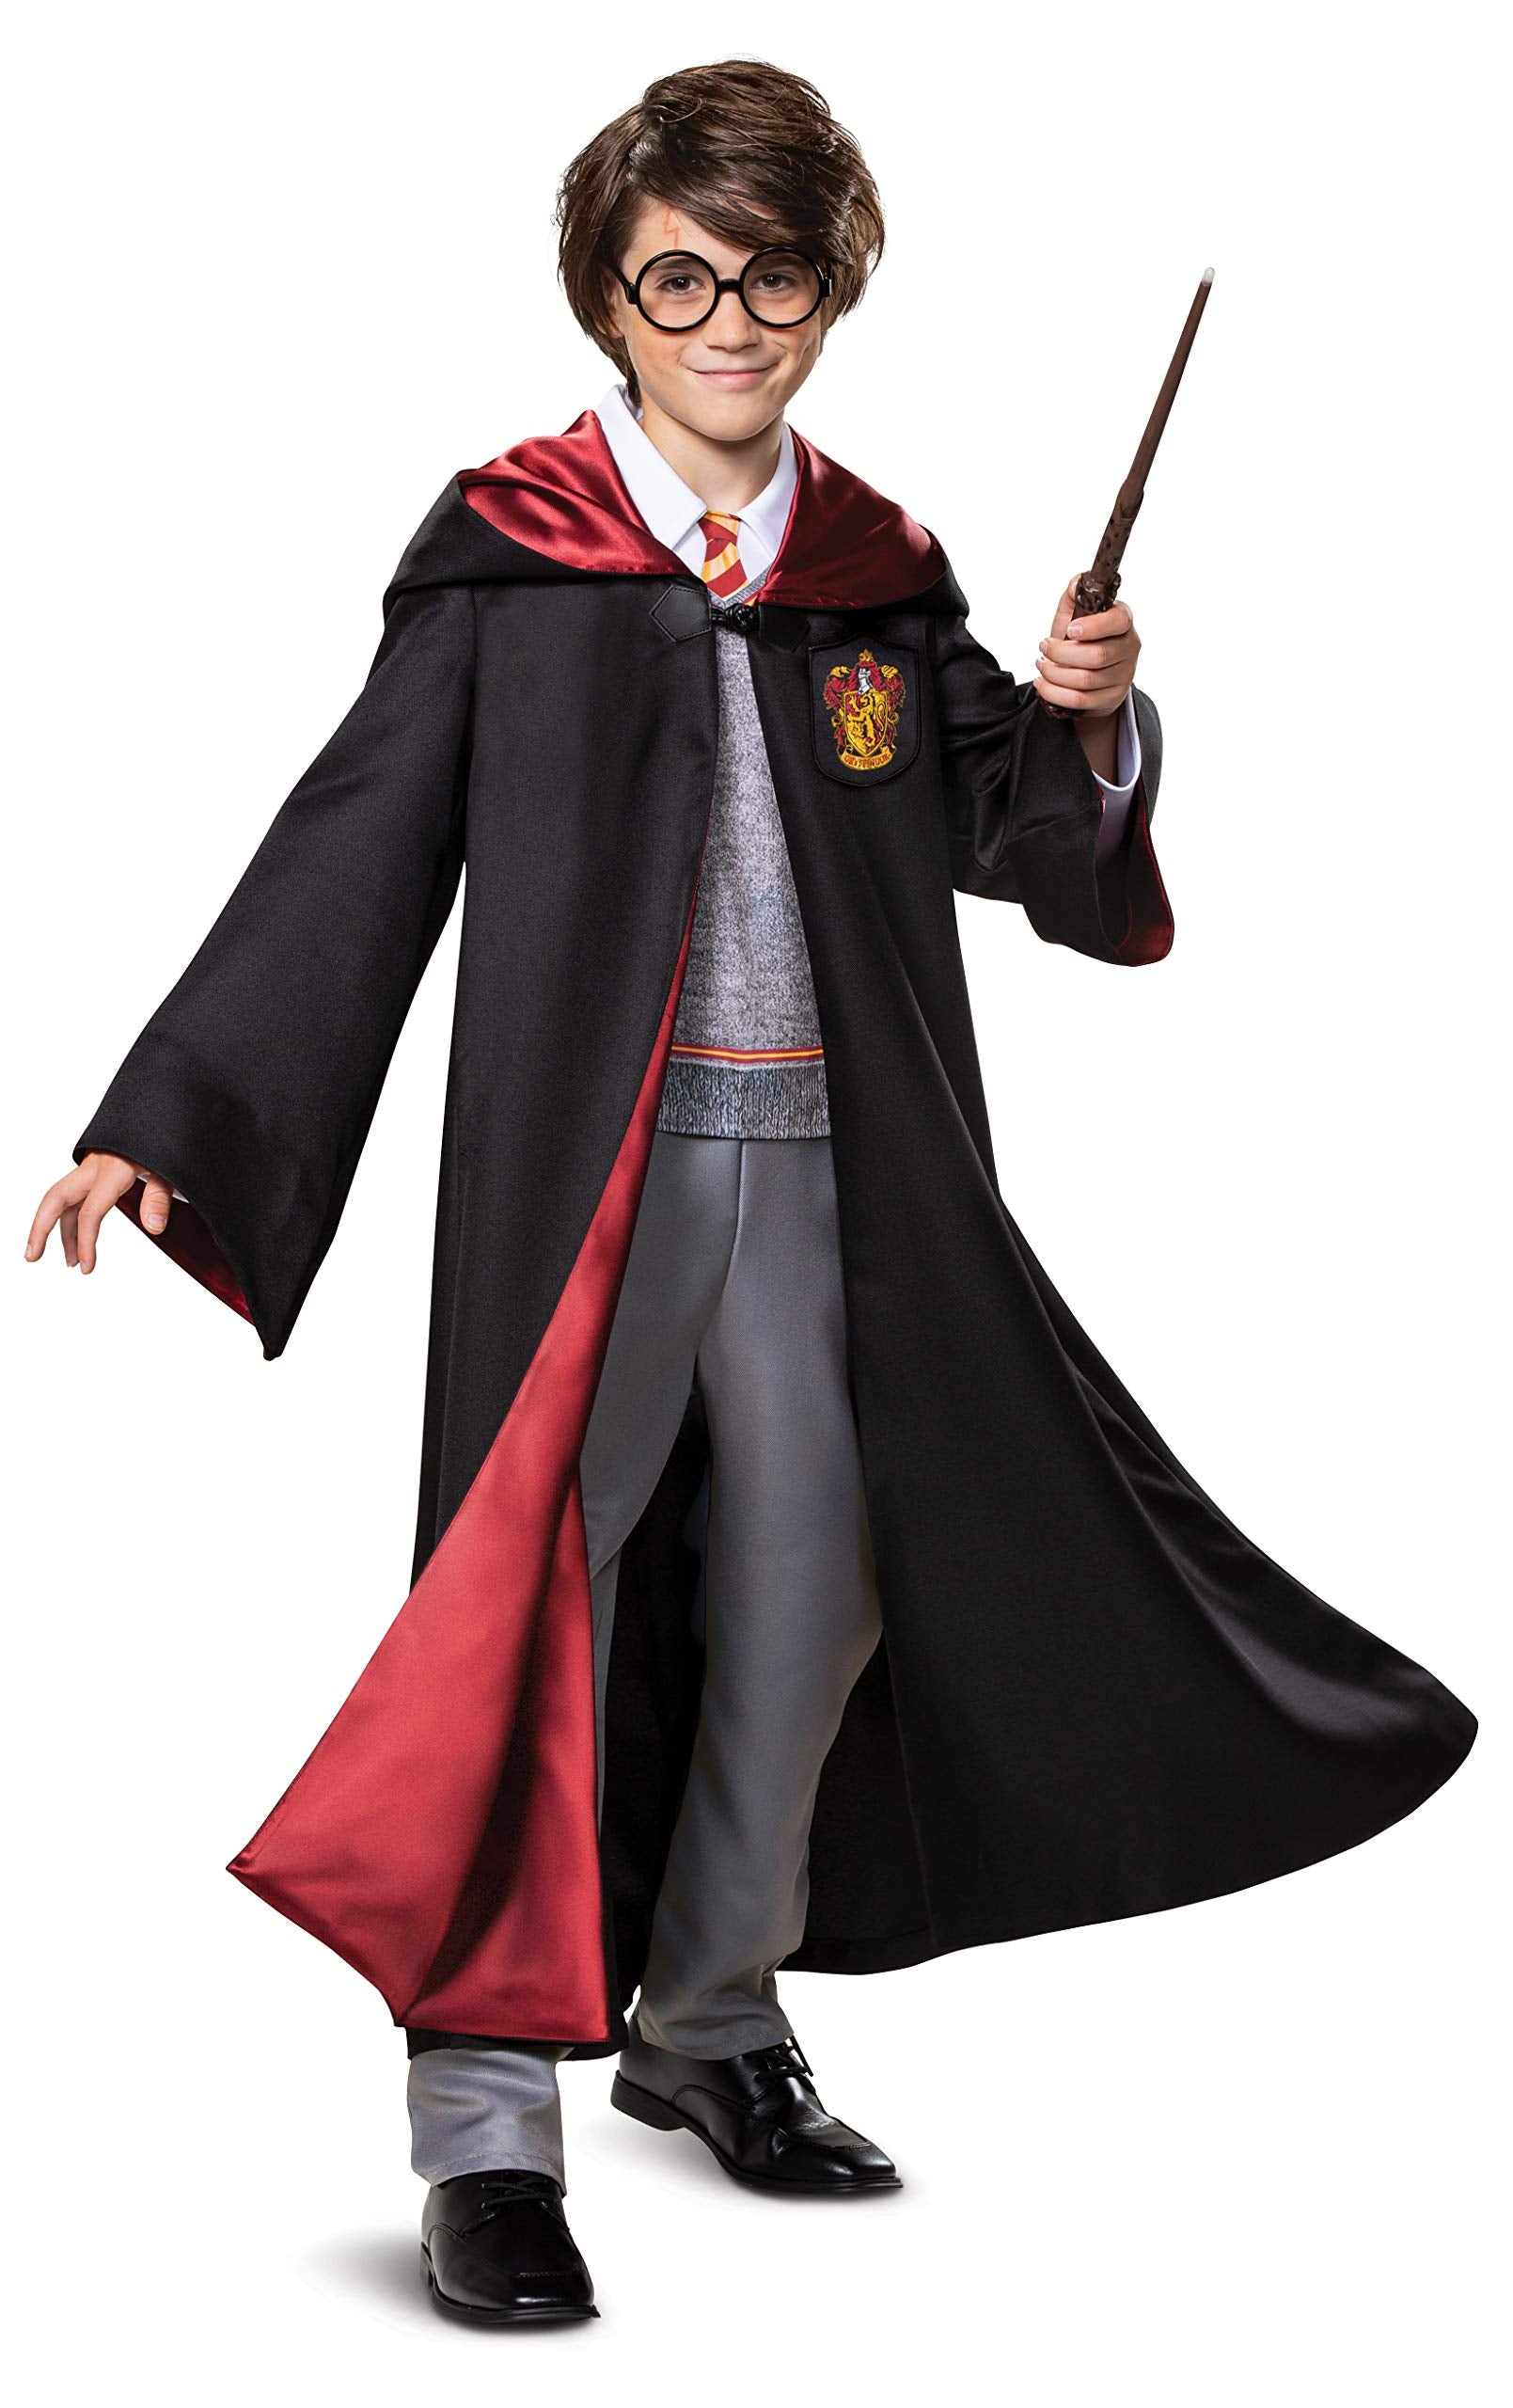 Harry Potter Premium Costume, Official Wizarding World Kids Prestige Hooded Robe and Jumpsuit, Child Size